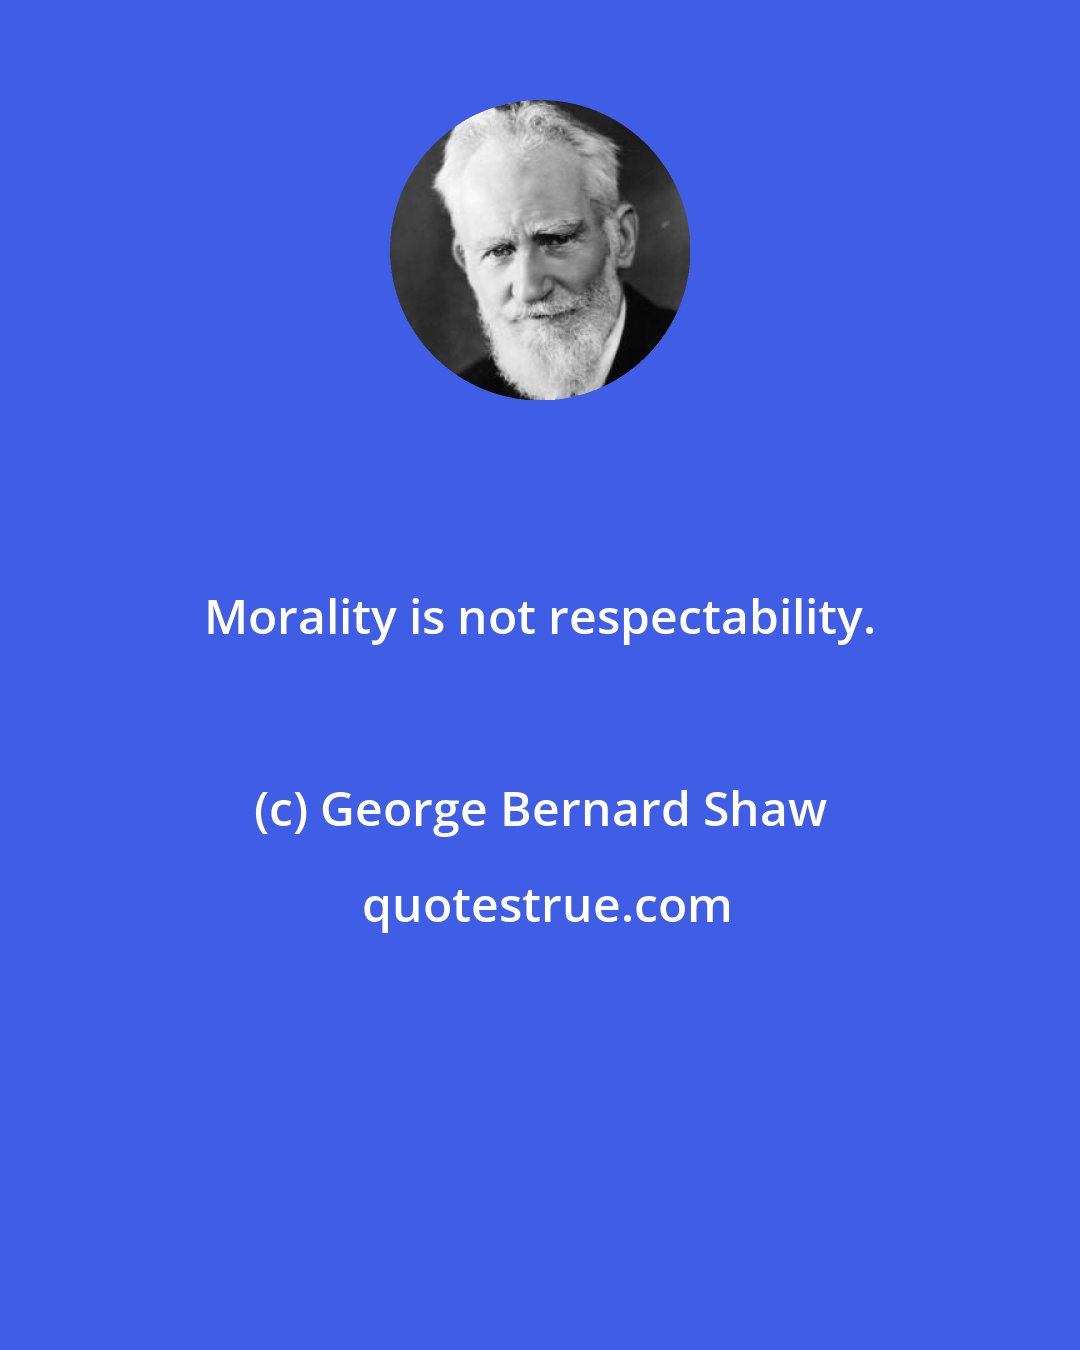 George Bernard Shaw: Morality is not respectability.